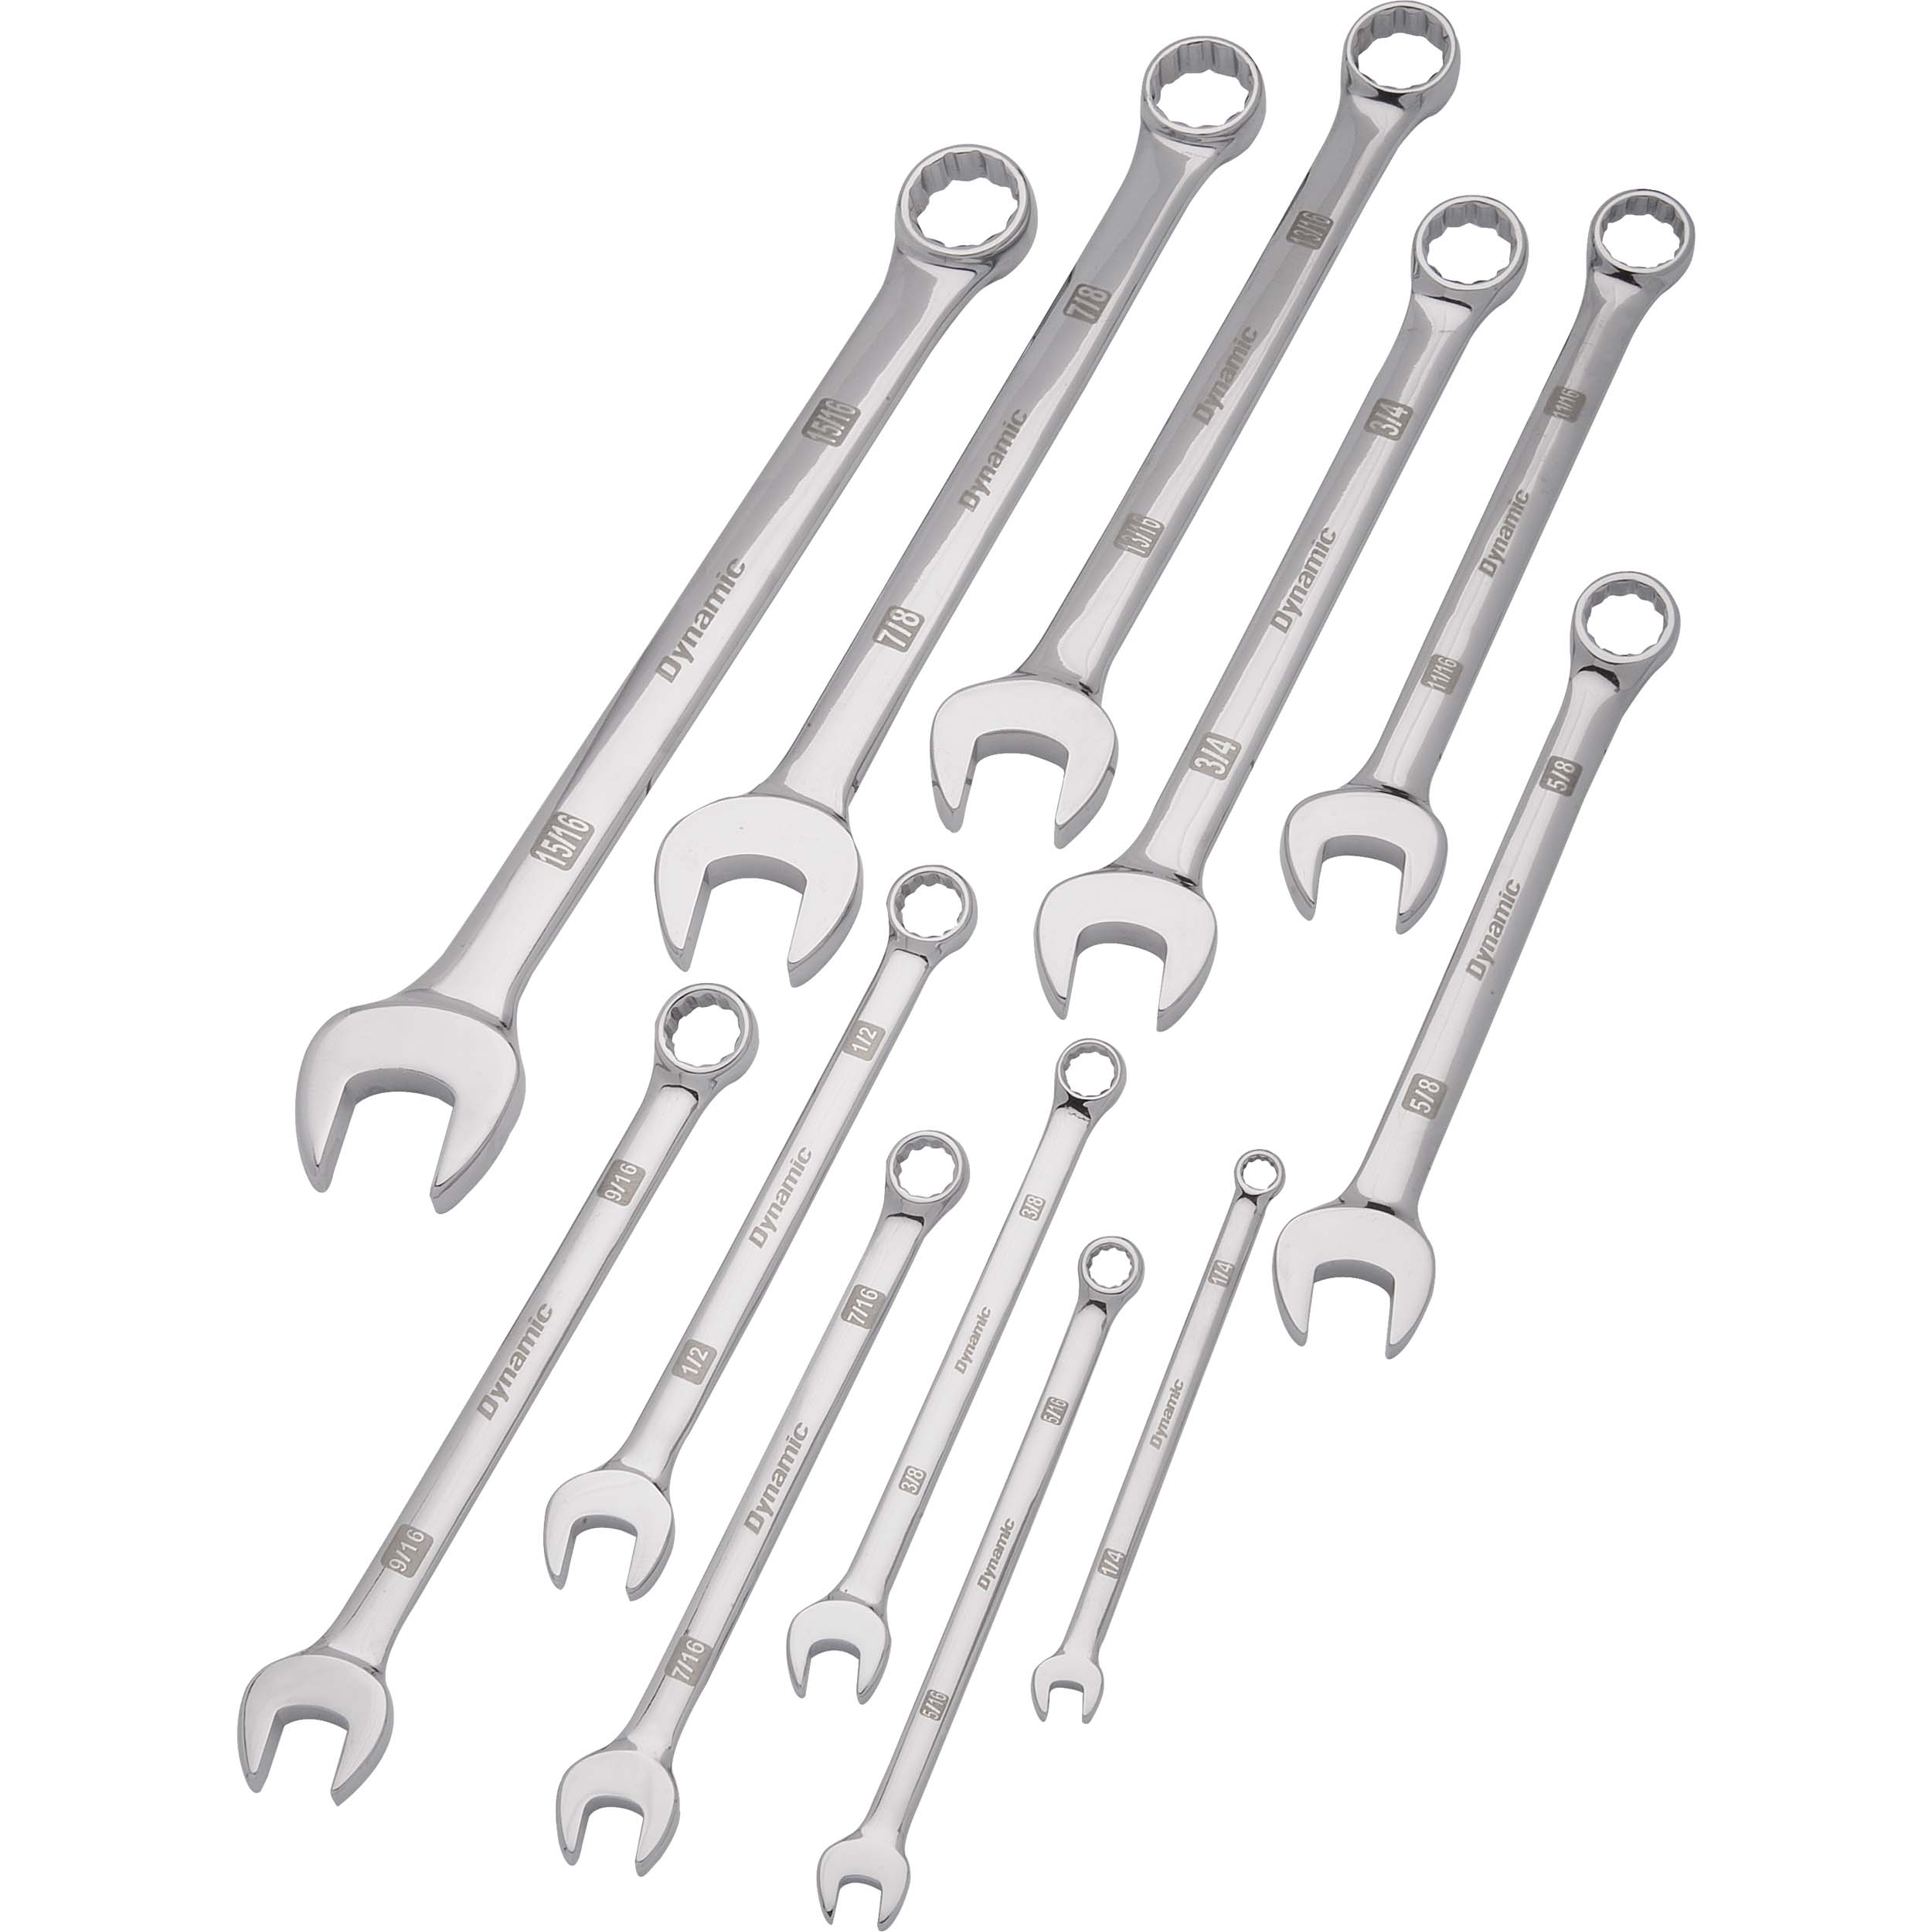 Tools 12pc Sae Combination Wrench Set With Mirror Chrome Finish, 1/4" - 15/16"